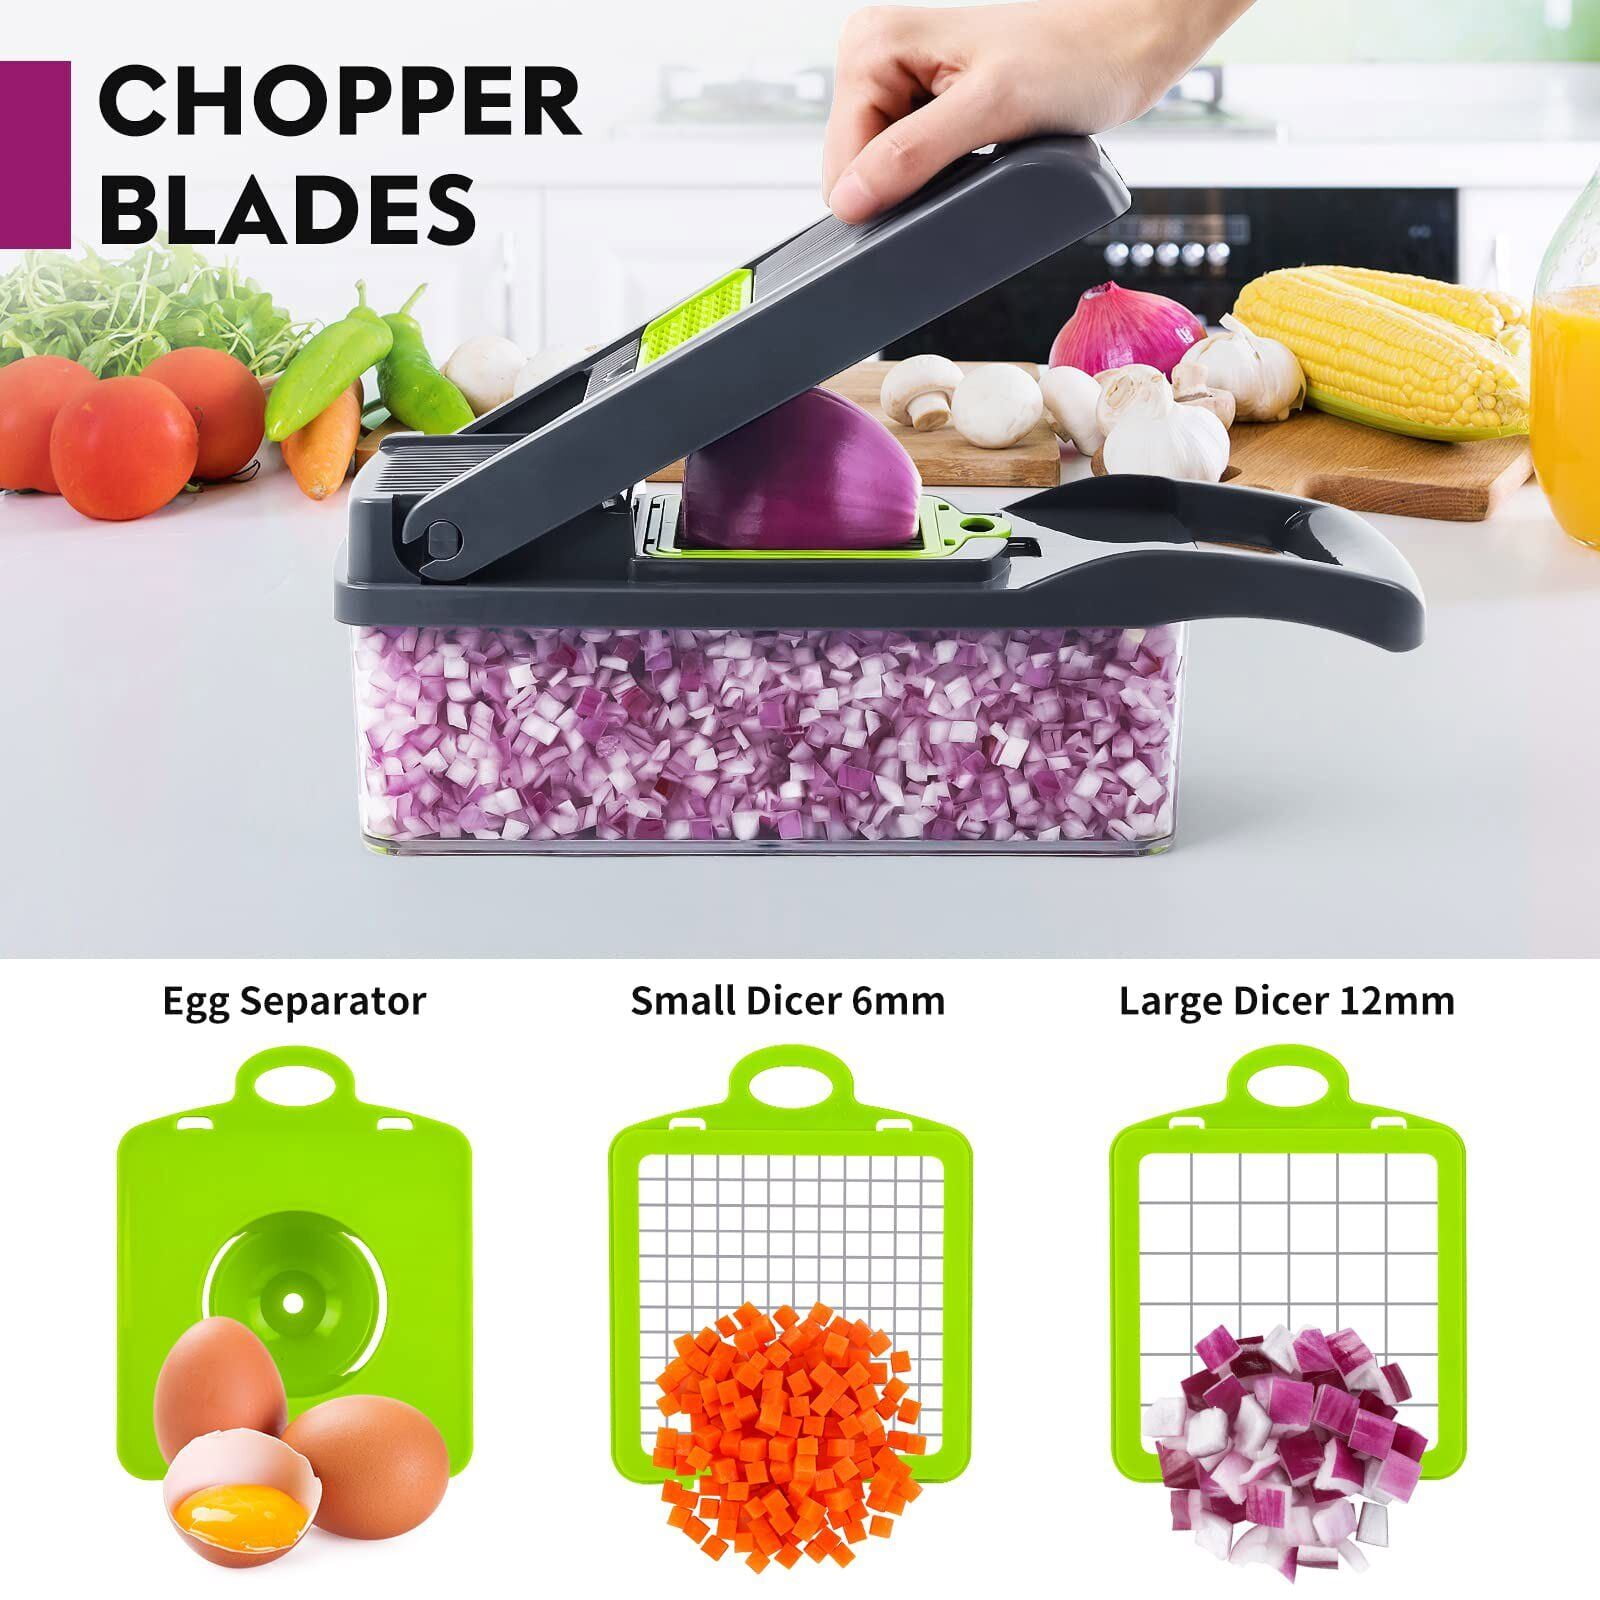  Kitexpert Vegetable Chopper, Onion Chopper Dicer Veggie Chopper  with 7 Blades and Container, 7-in-1 Chopper Vegetable Cutter, Kitchen Vegetable  Slicer Dicer Cutter Food Chopper (Grey): Home & Kitchen